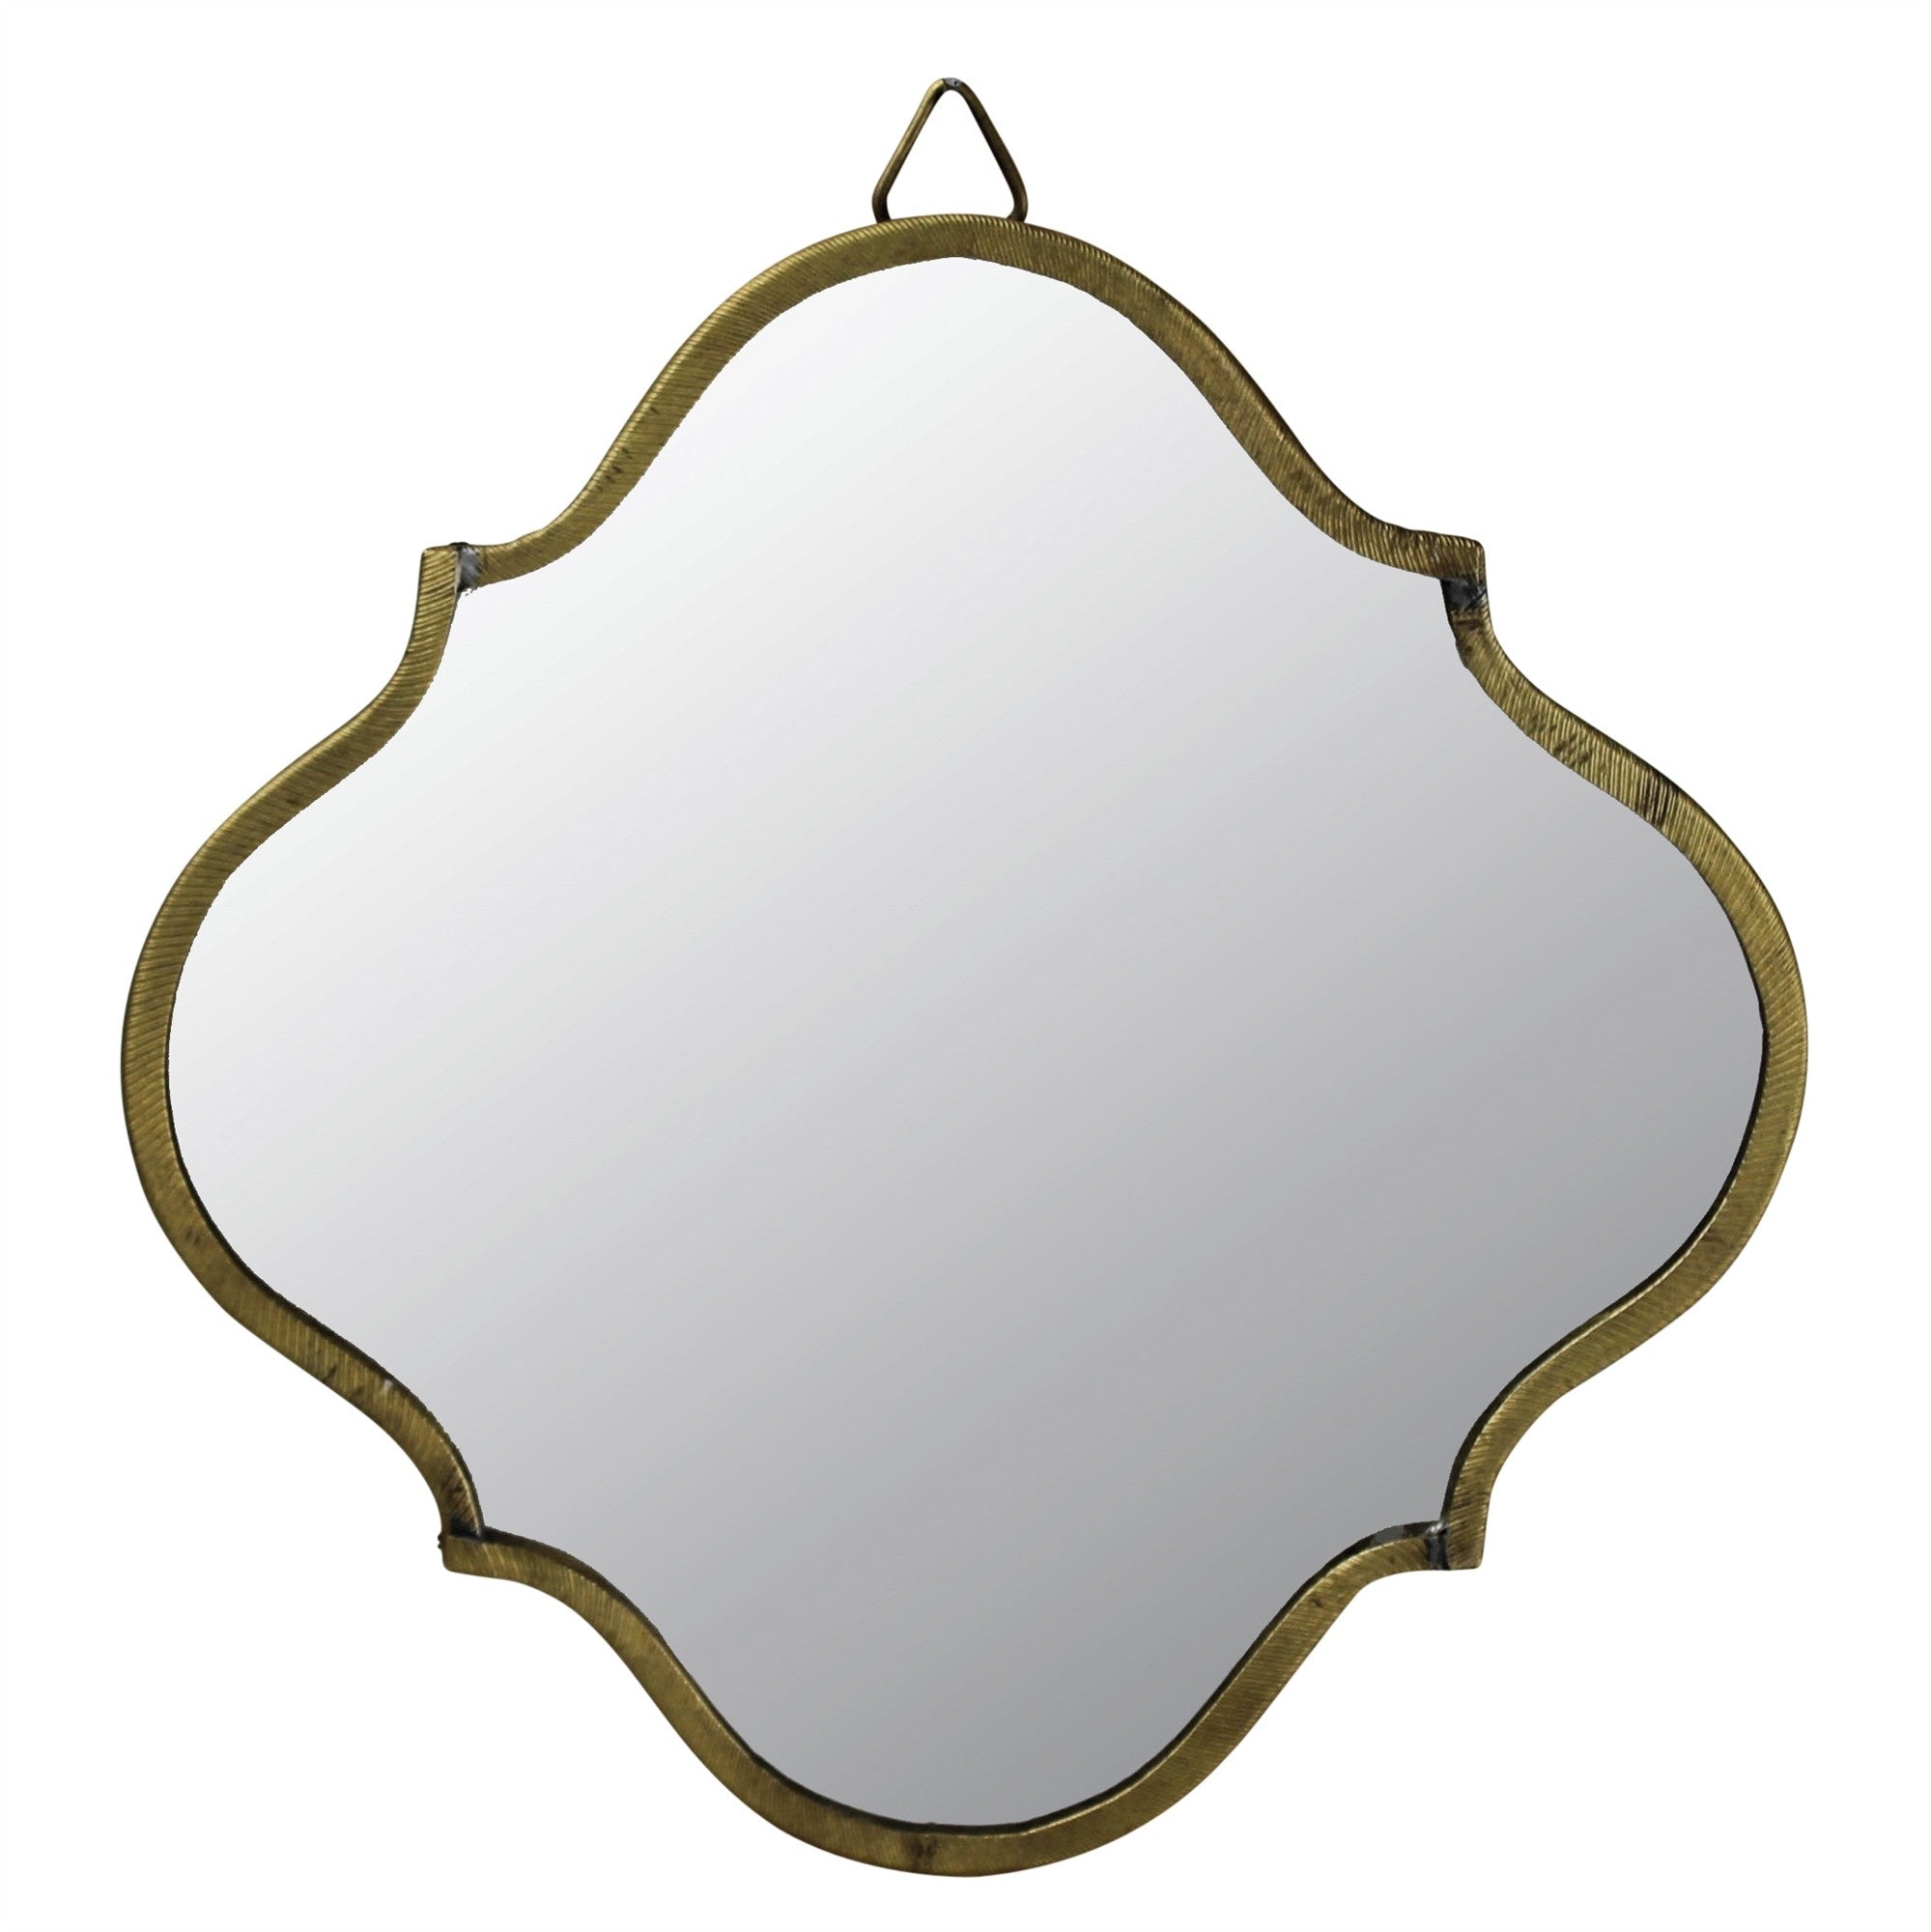 9" Gold Novelty Accent Metal Framed Mirror